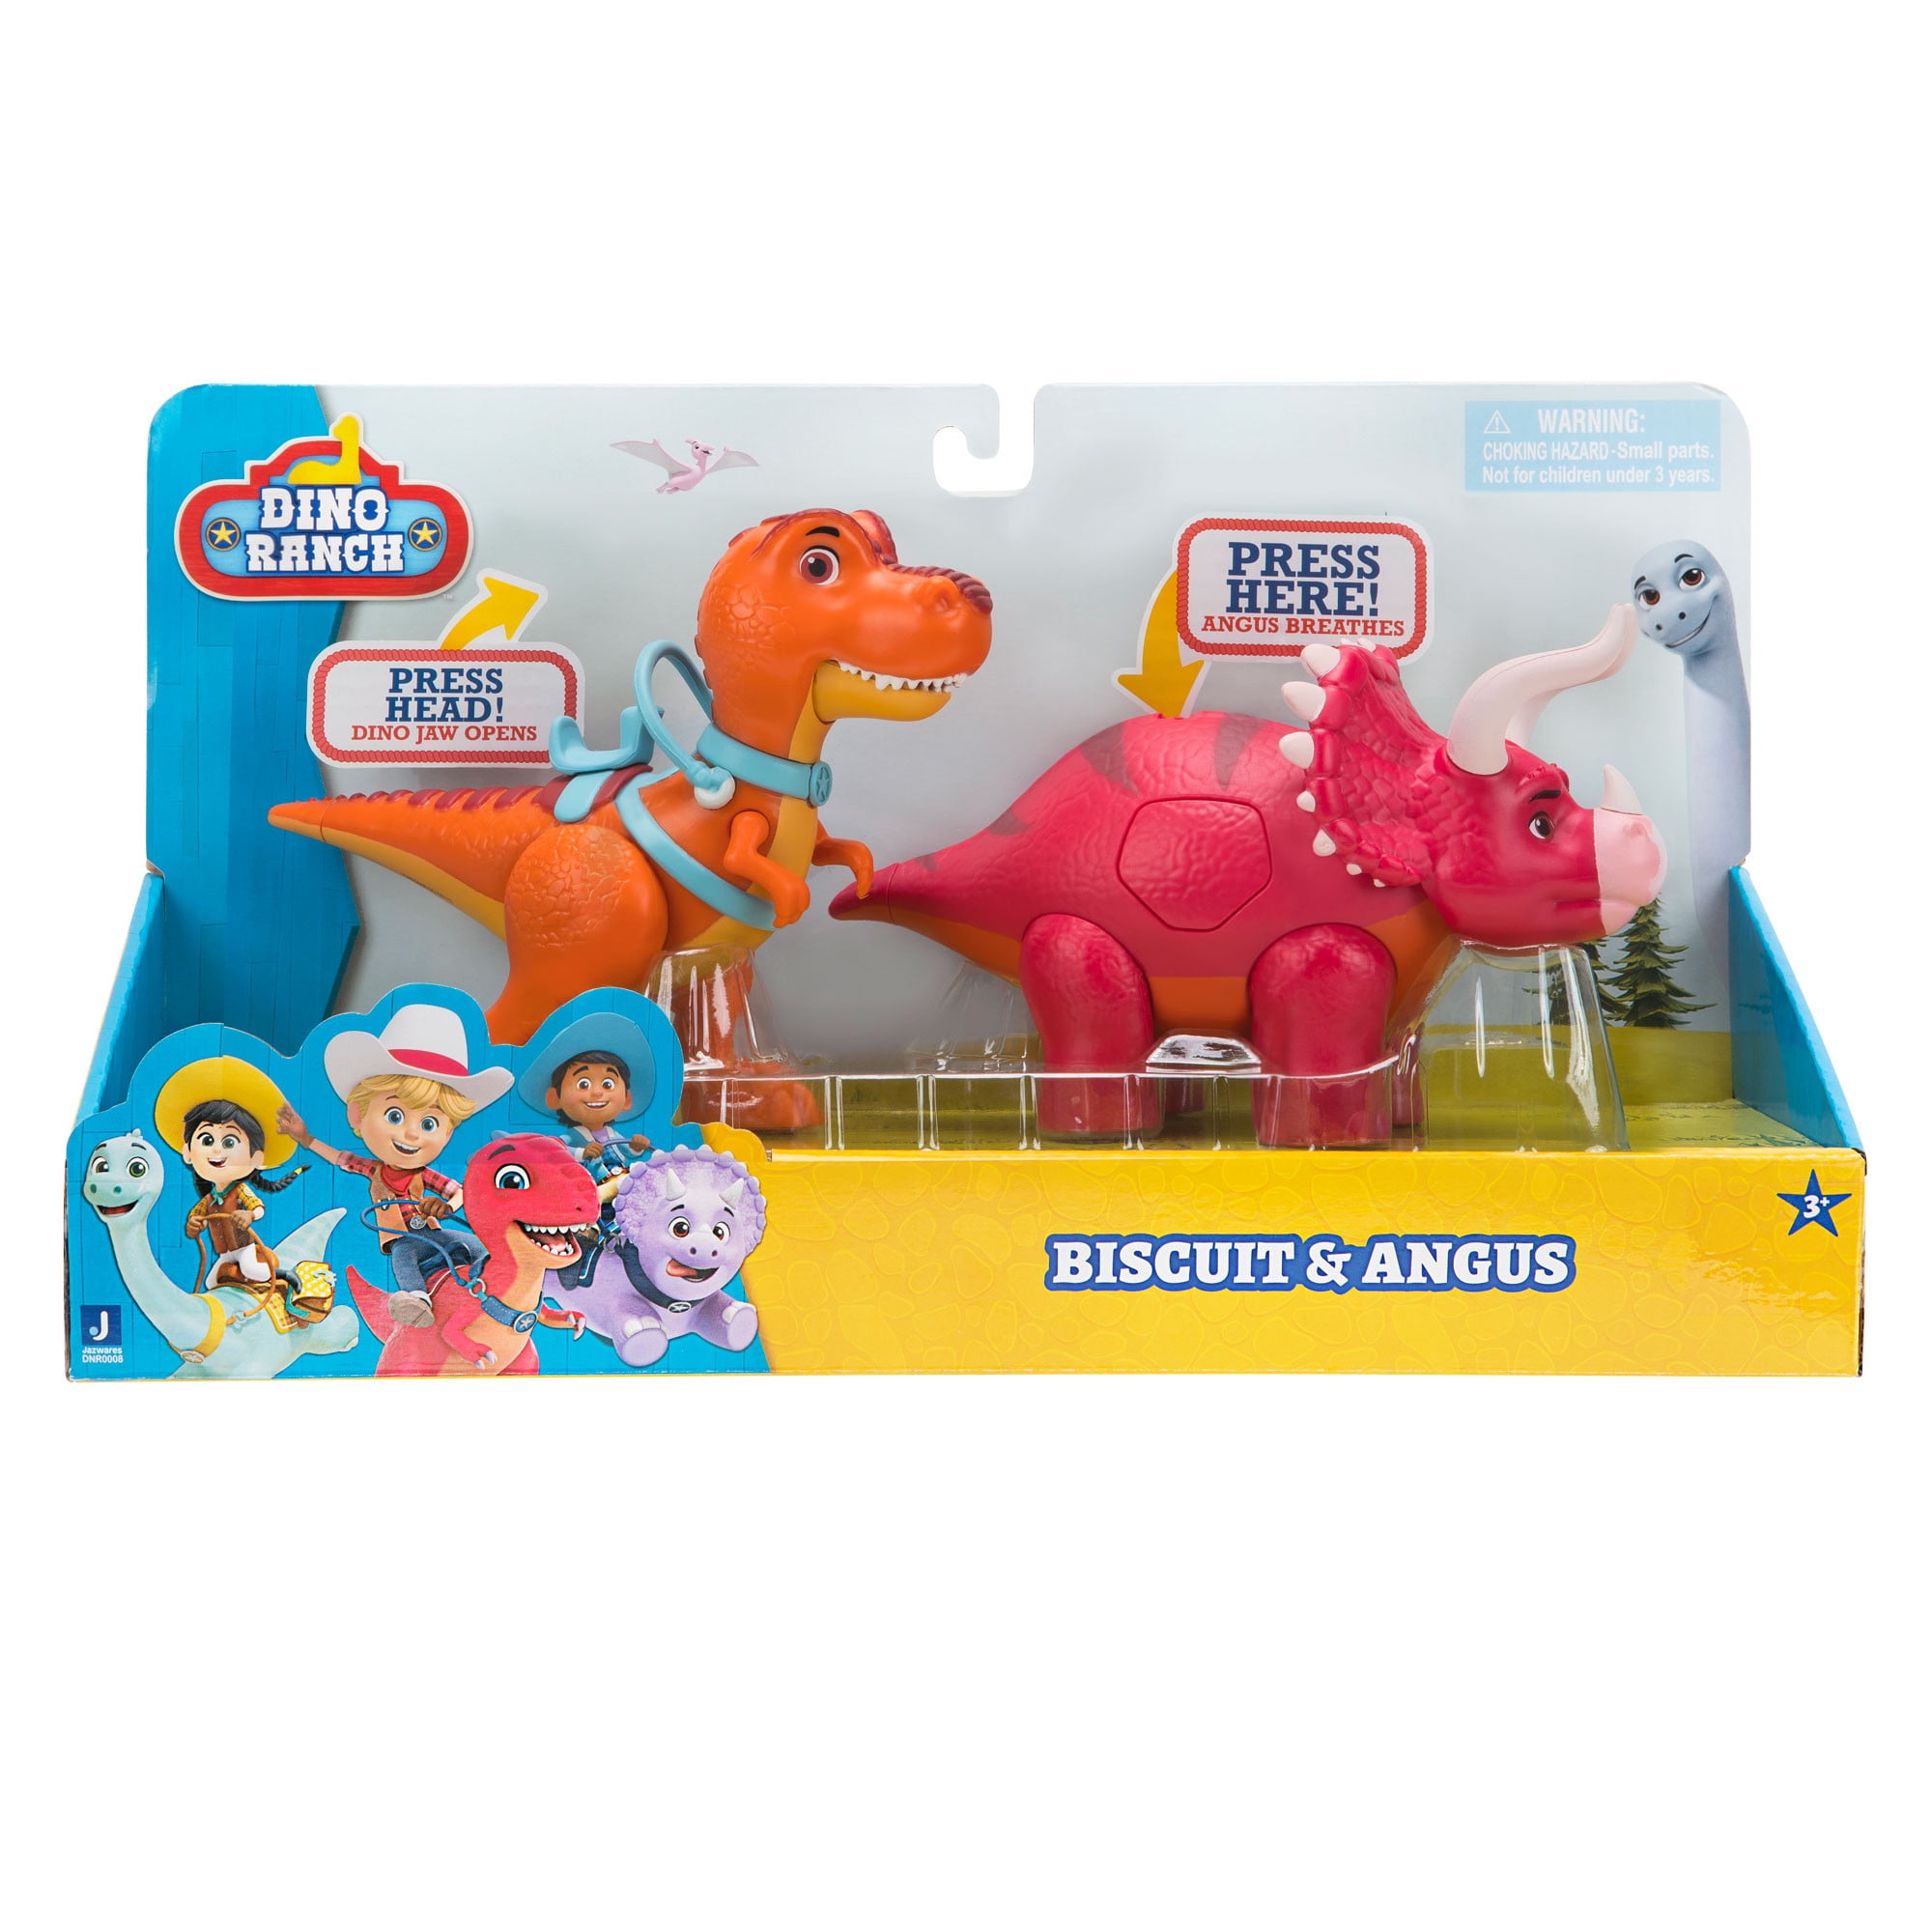 Dino Ranch Pre-Westoric Ranchers Vehicle 3 Pack Dino Riding Adventure 